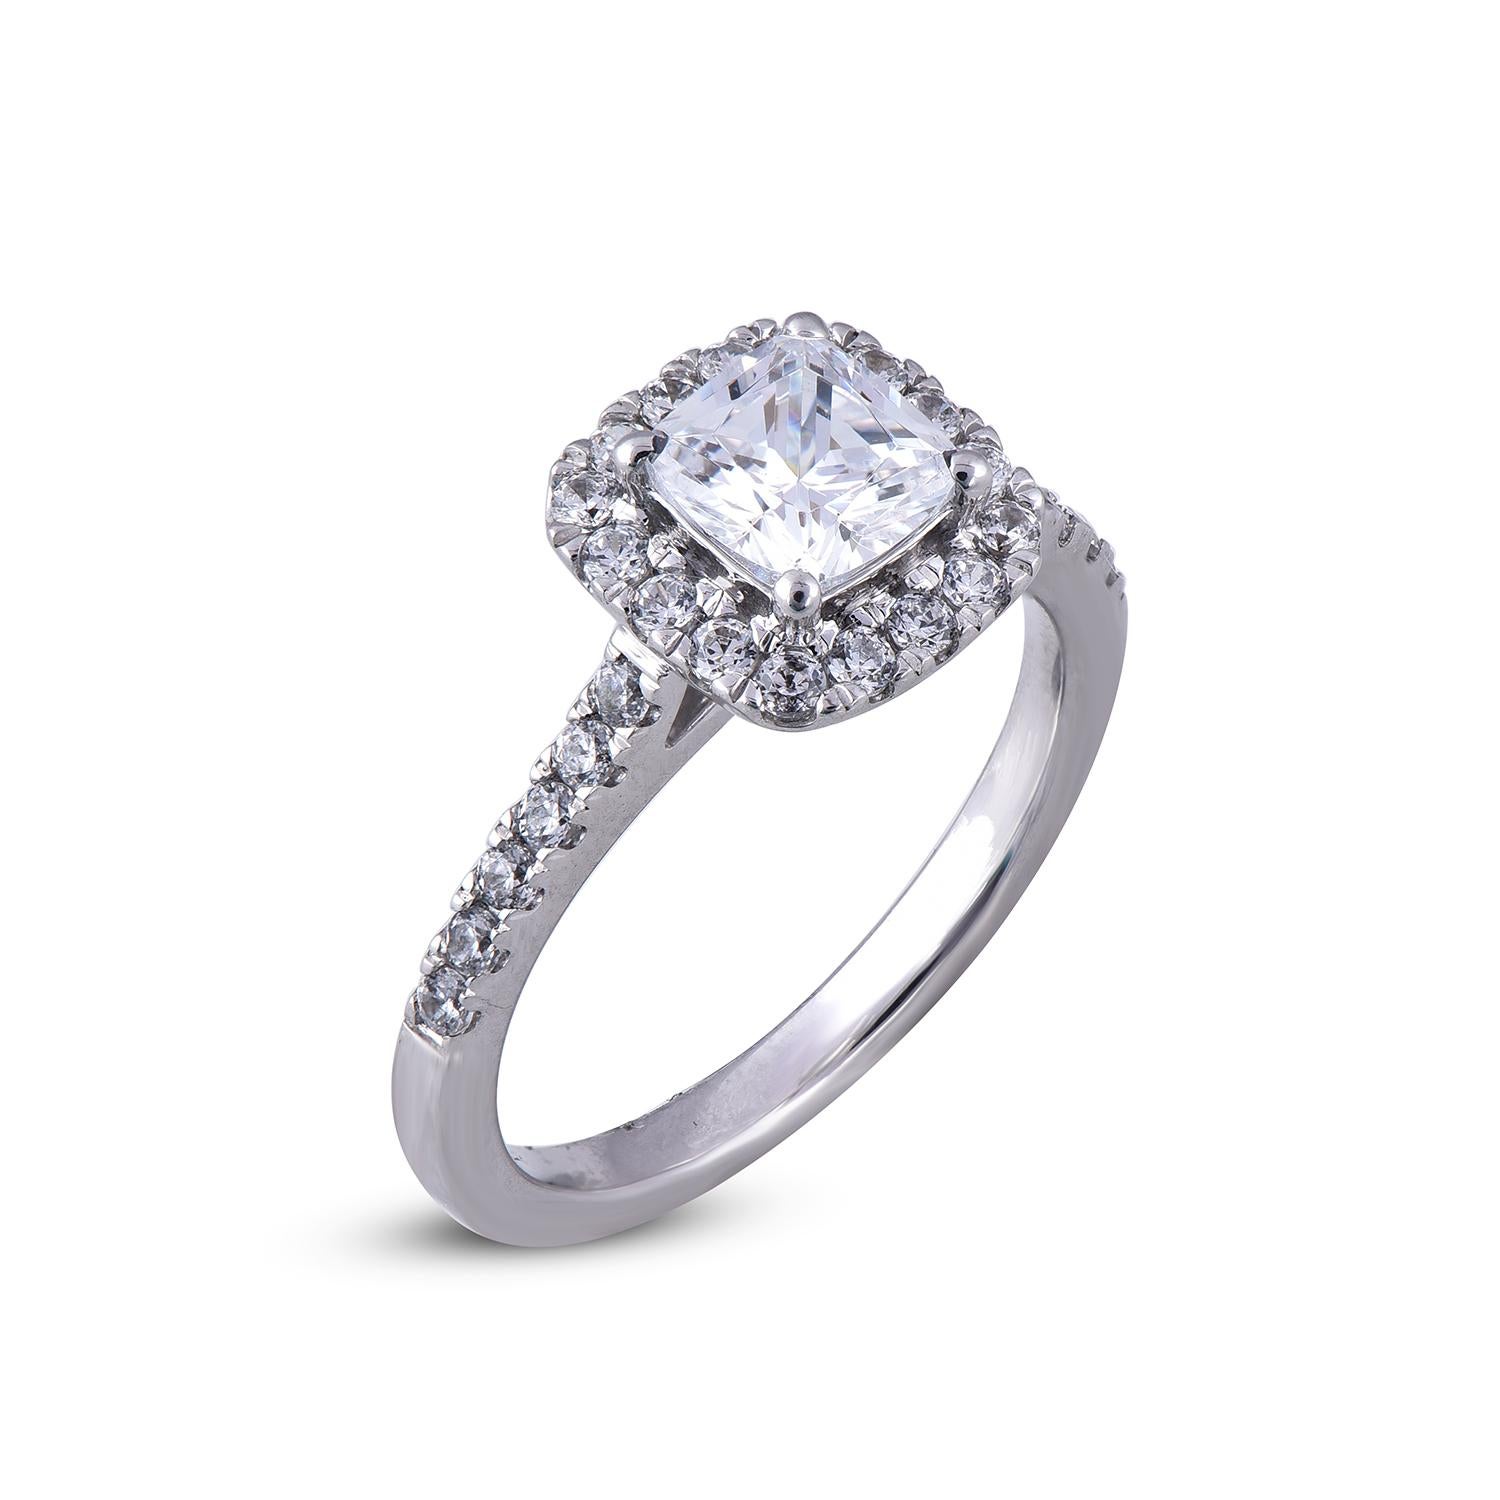 This ring is studded with 1.00ct of  Cushion and 0.50ct of 28 round diamonds elegantly set in prong setting and made by our experts in 18 karat white gold, diamonds are graded G-H Color, SI1-2 Clarity. This is a perfect gift ​for love of your life
